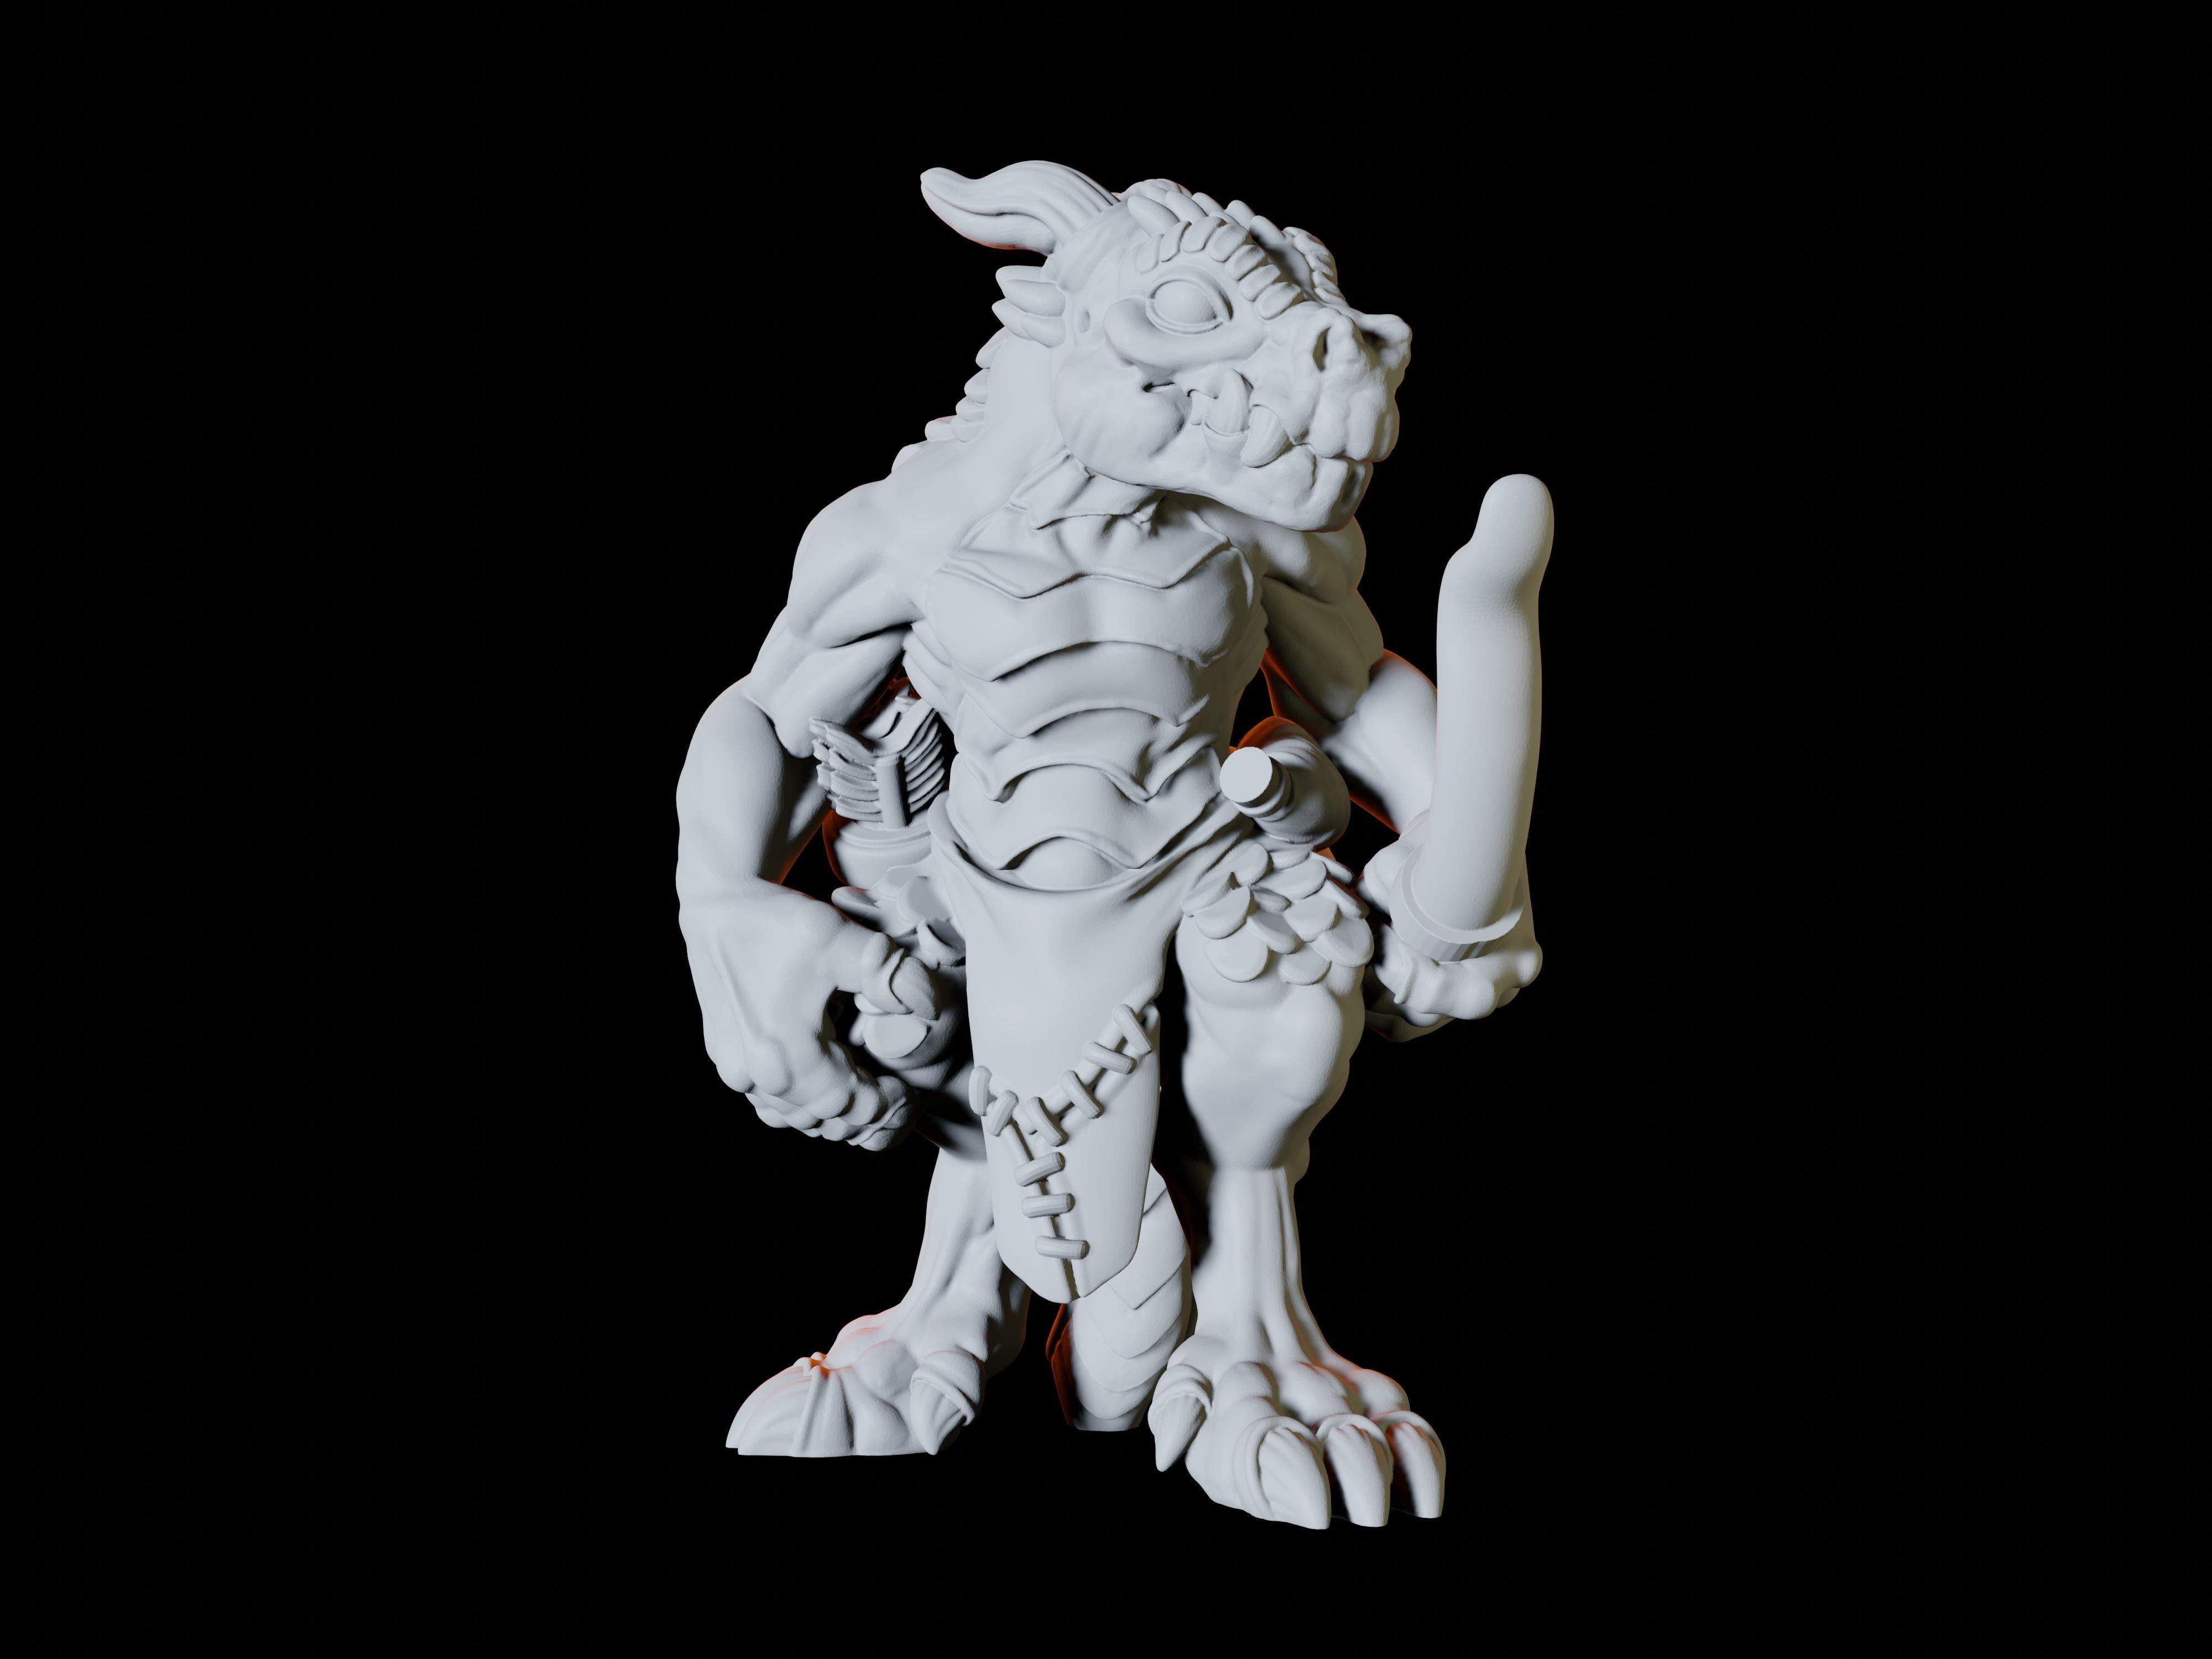 Four Kobold Archer Miniatures for Dungeons and Dragons - Myth Forged